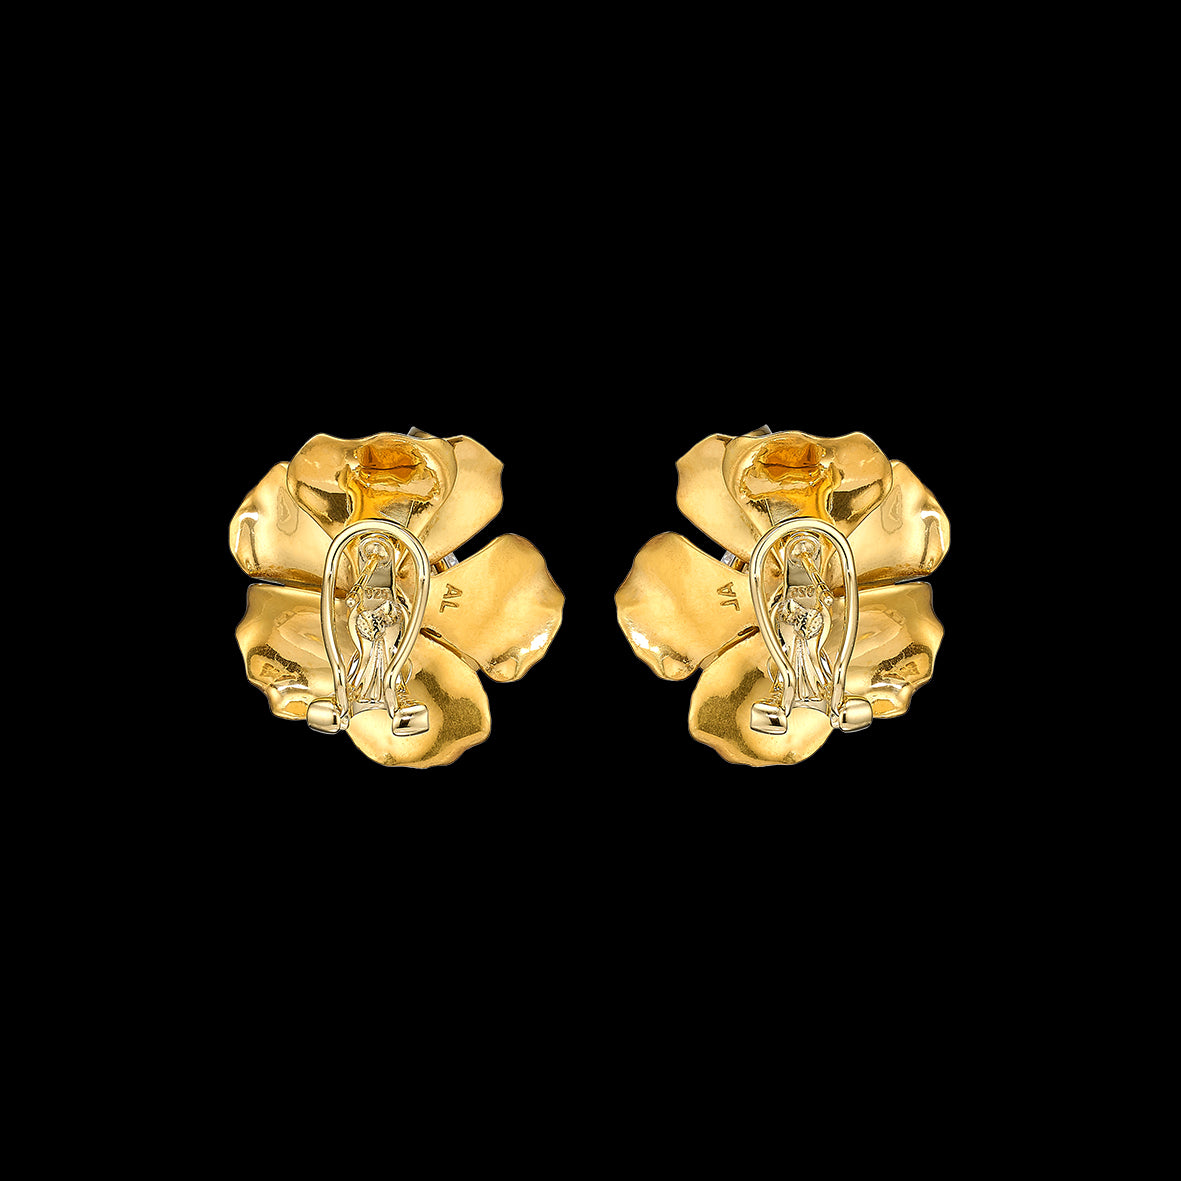 Reine de Soleil Studs, Earrings, Anabela Chan Joaillerie - Fine jewelry with laboratory grown and created gemstones hand-crafted in the United Kingdom. Anabela Chan Joaillerie is the first fine jewellery brand in the world to champion laboratory-grown and created gemstones with high jewellery design, artisanal craftsmanship and a focus on ethical and sustainable innovations.